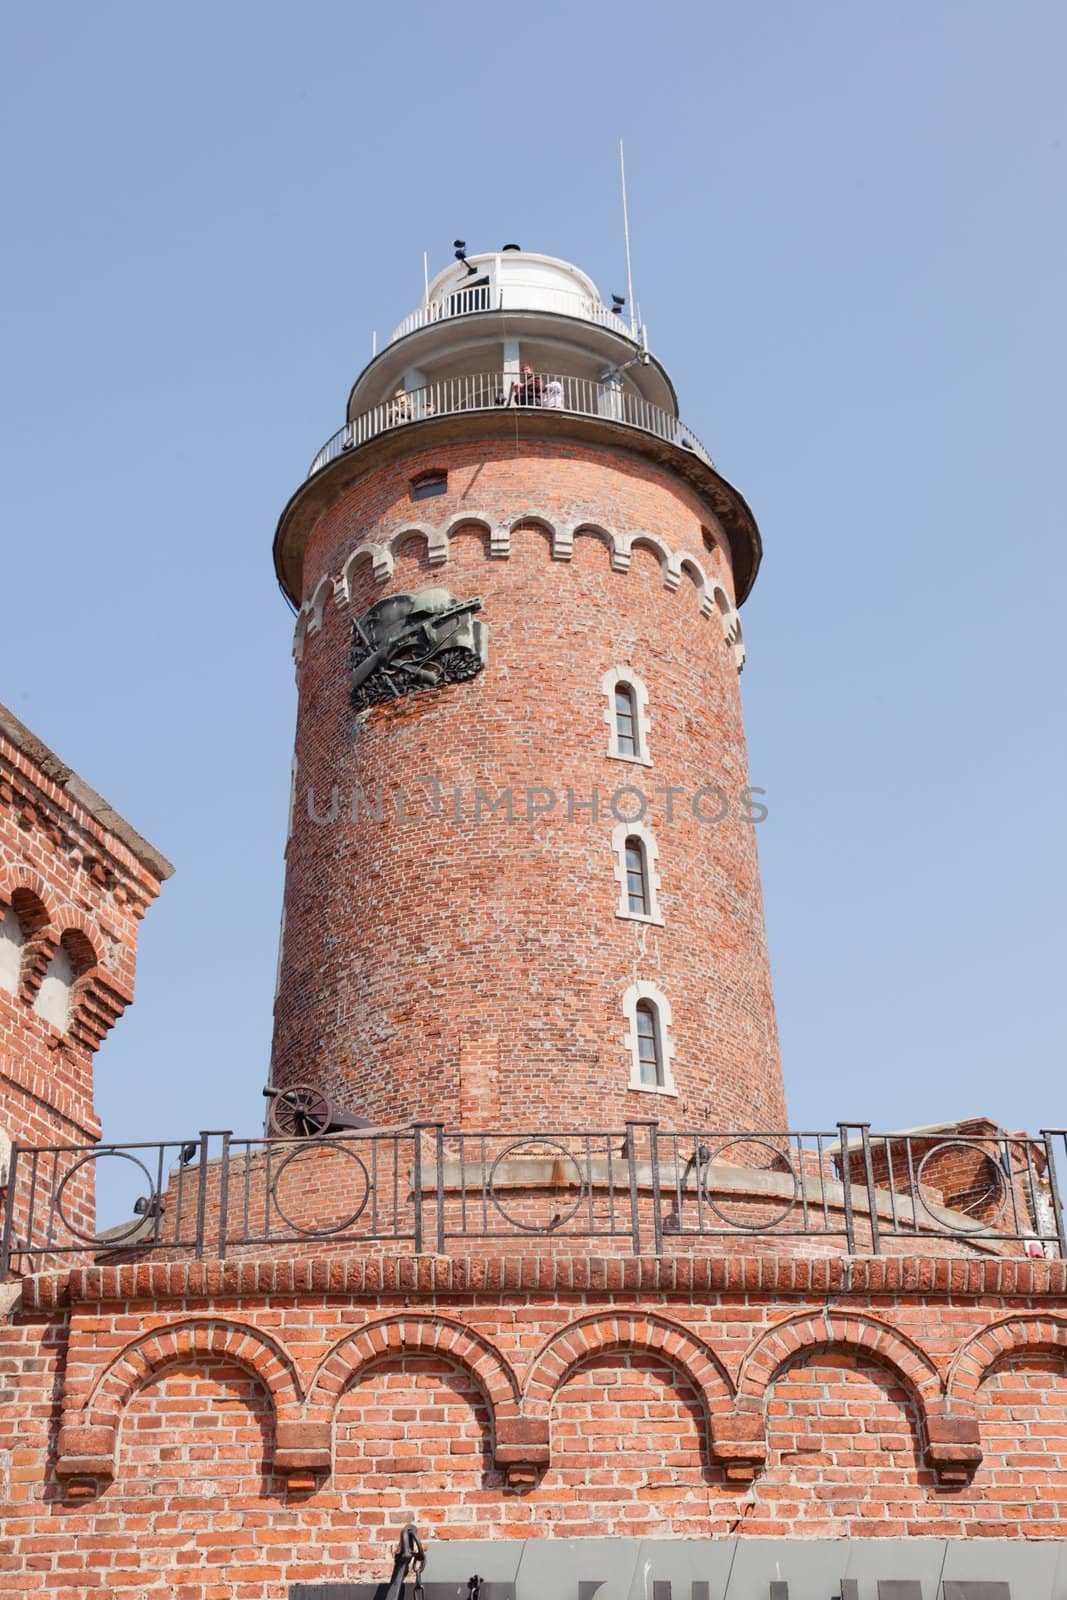 The lighthouse was built in 1945 on the ruins of the fort from the eighteenth century.